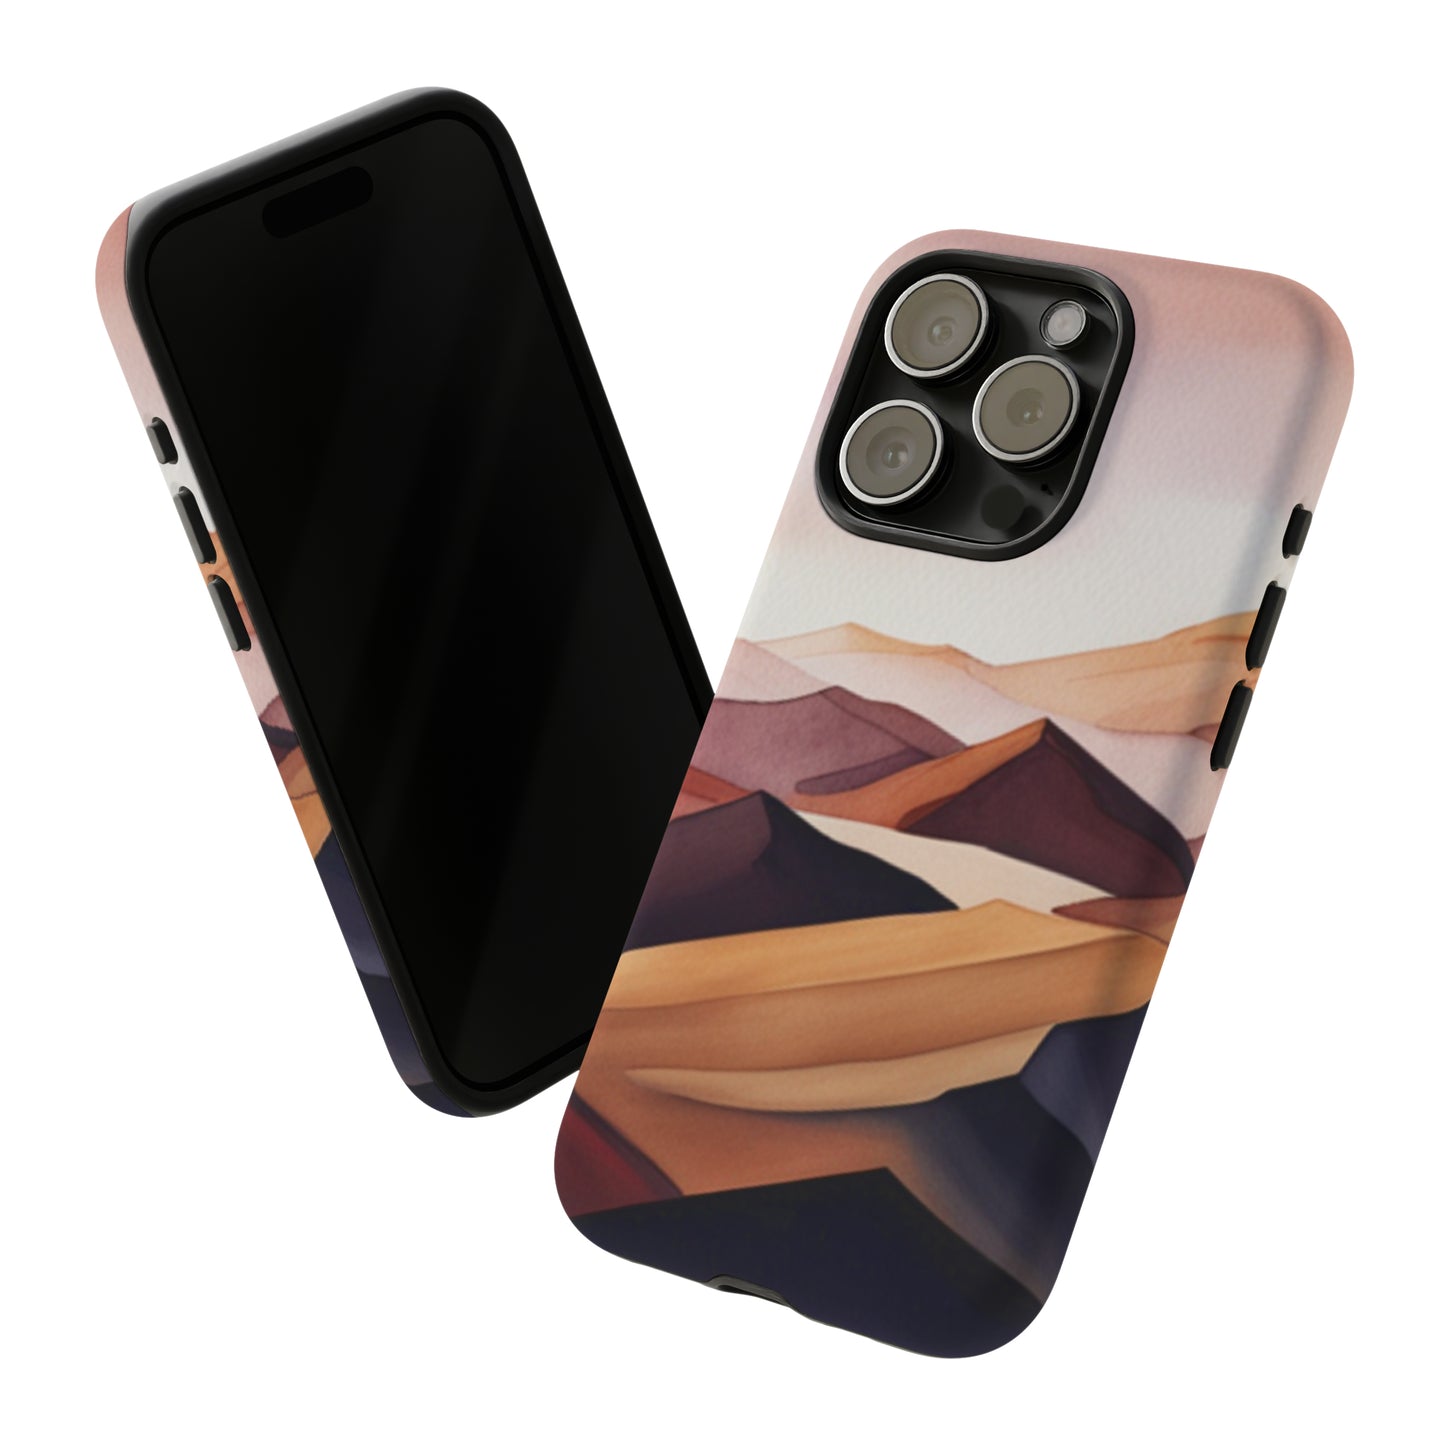 Tough Cases for Apple iPhone, Samsung Galaxy, and Google Pixel devices with premium-quality custom protective phone cases.